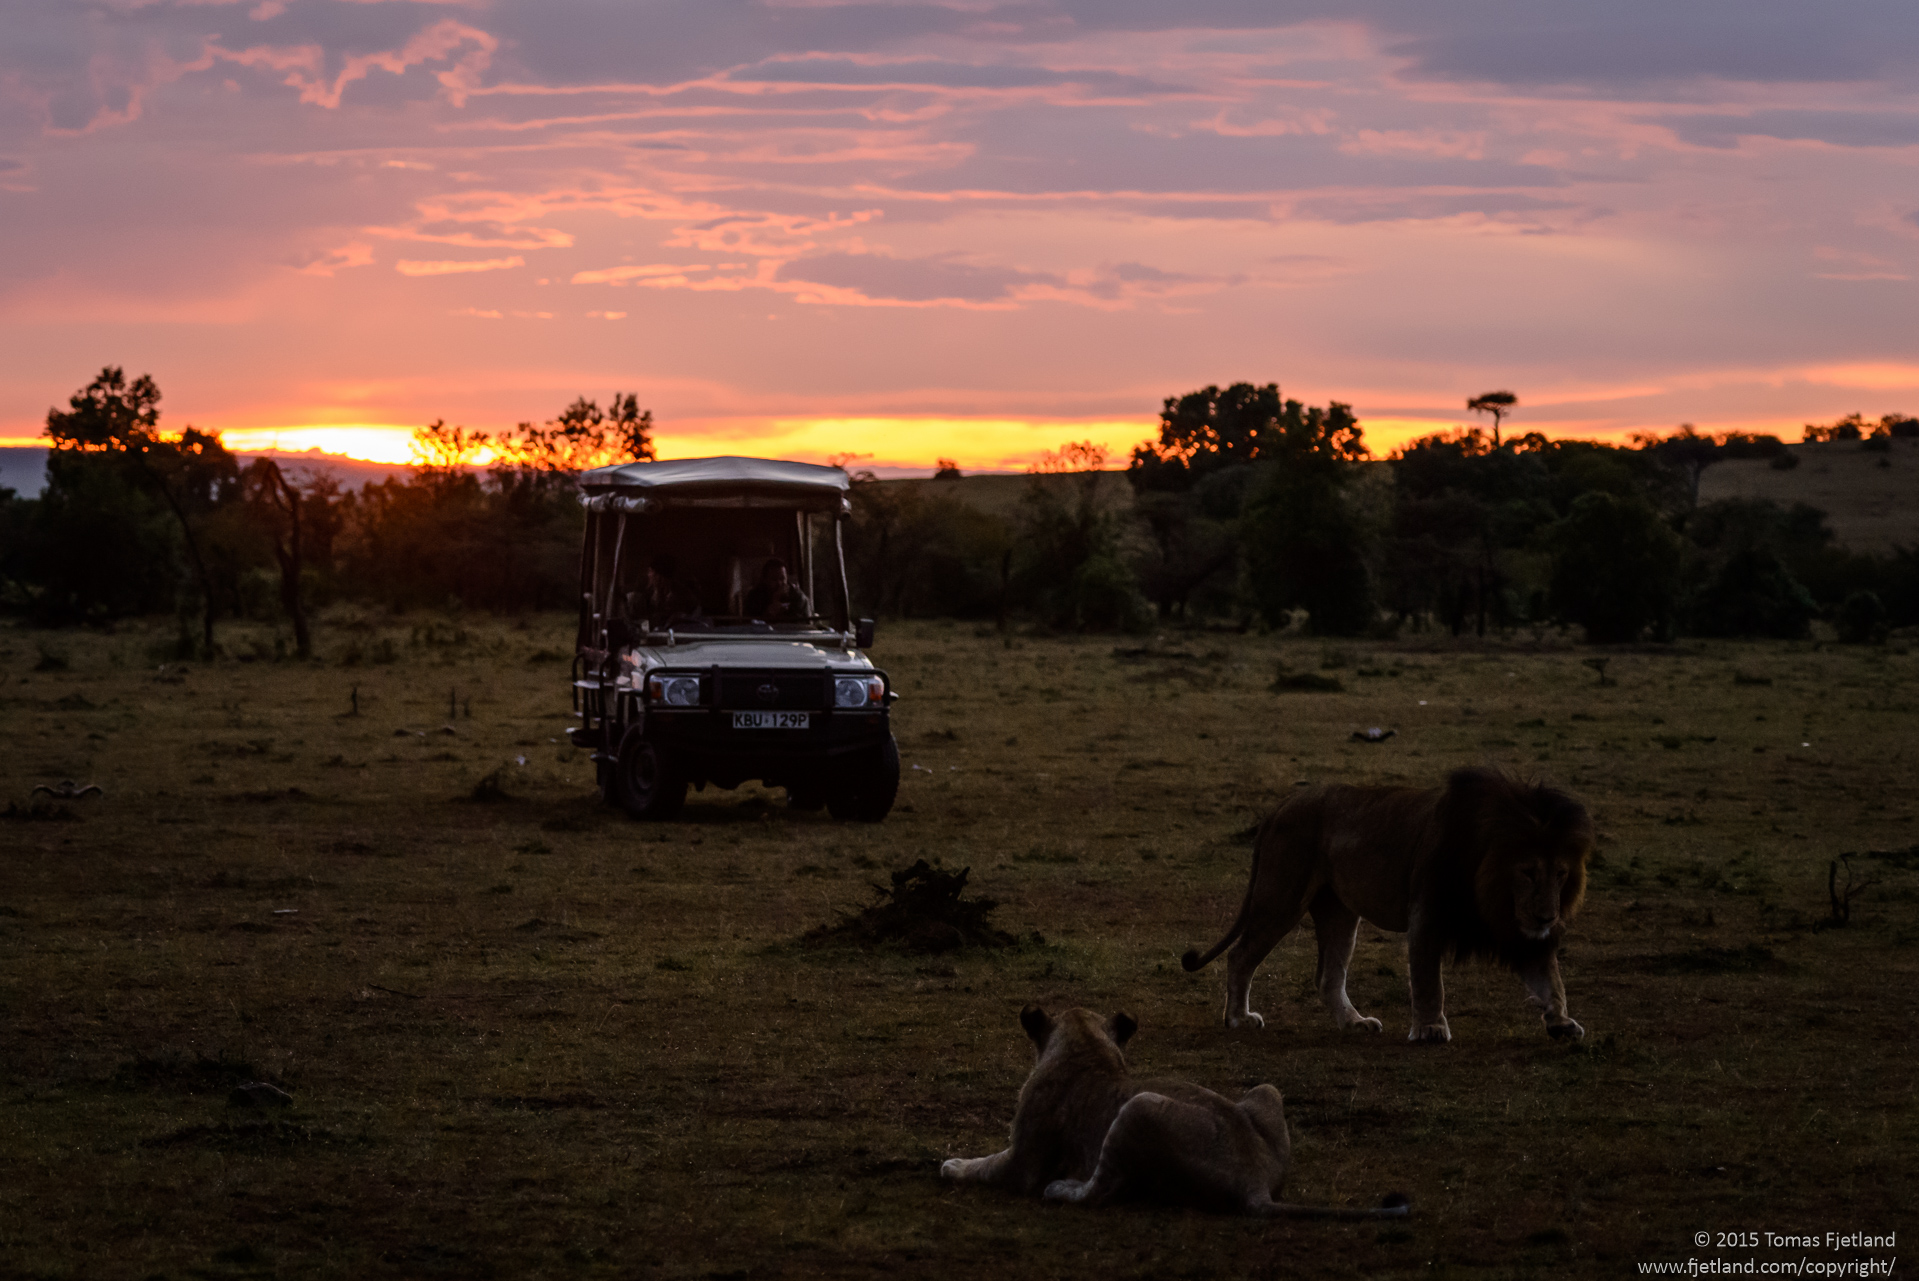 Lionwatching as the sun sets